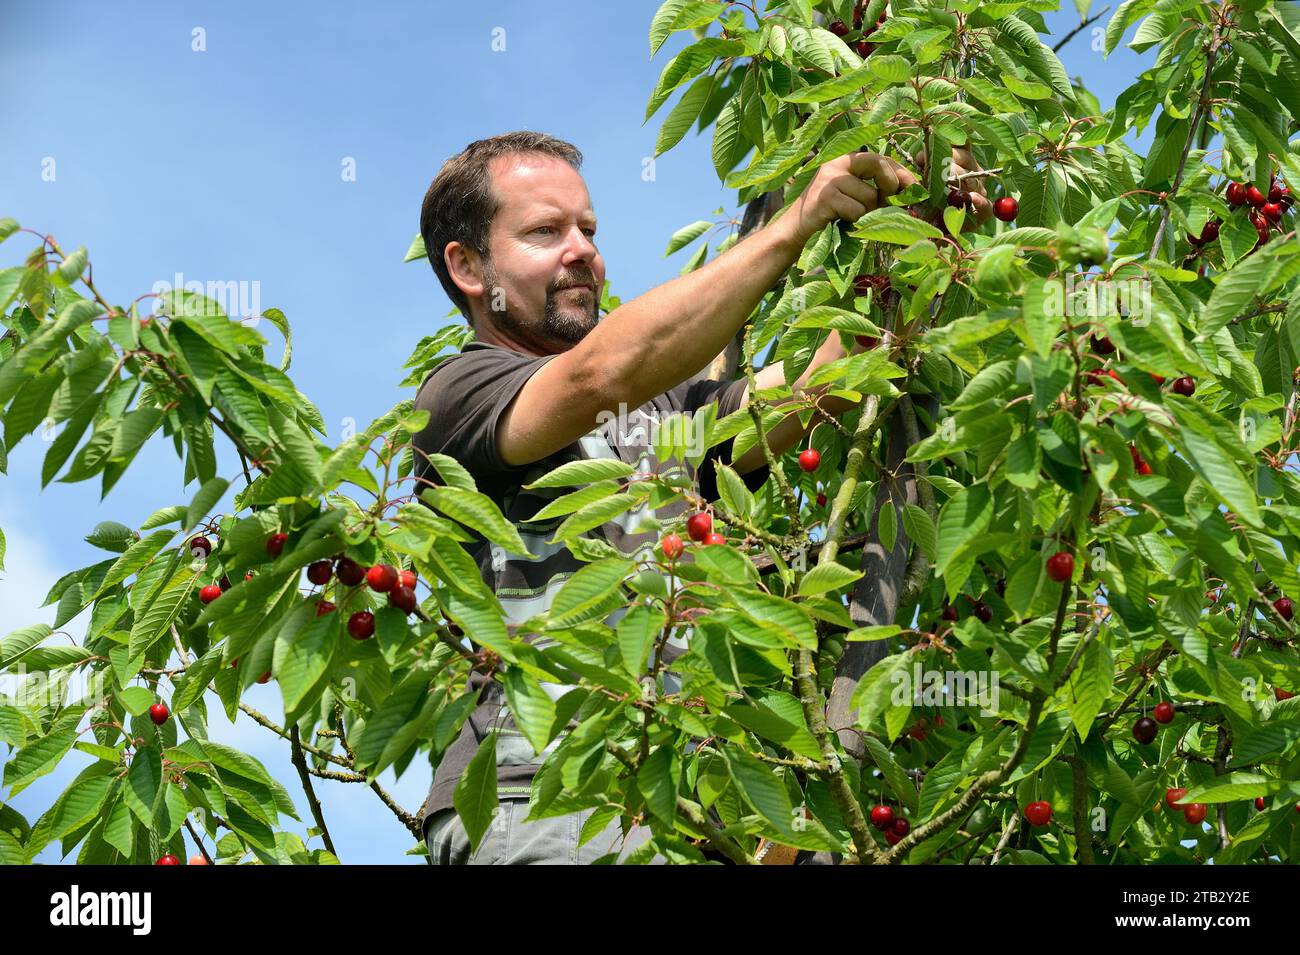 Claire and Pascal Crevel's fruit farm in Le Mesnil-sous-Jumieges (northern France): cherry picking in the Seine Valley. Man standing on a ladder picki Stock Photo